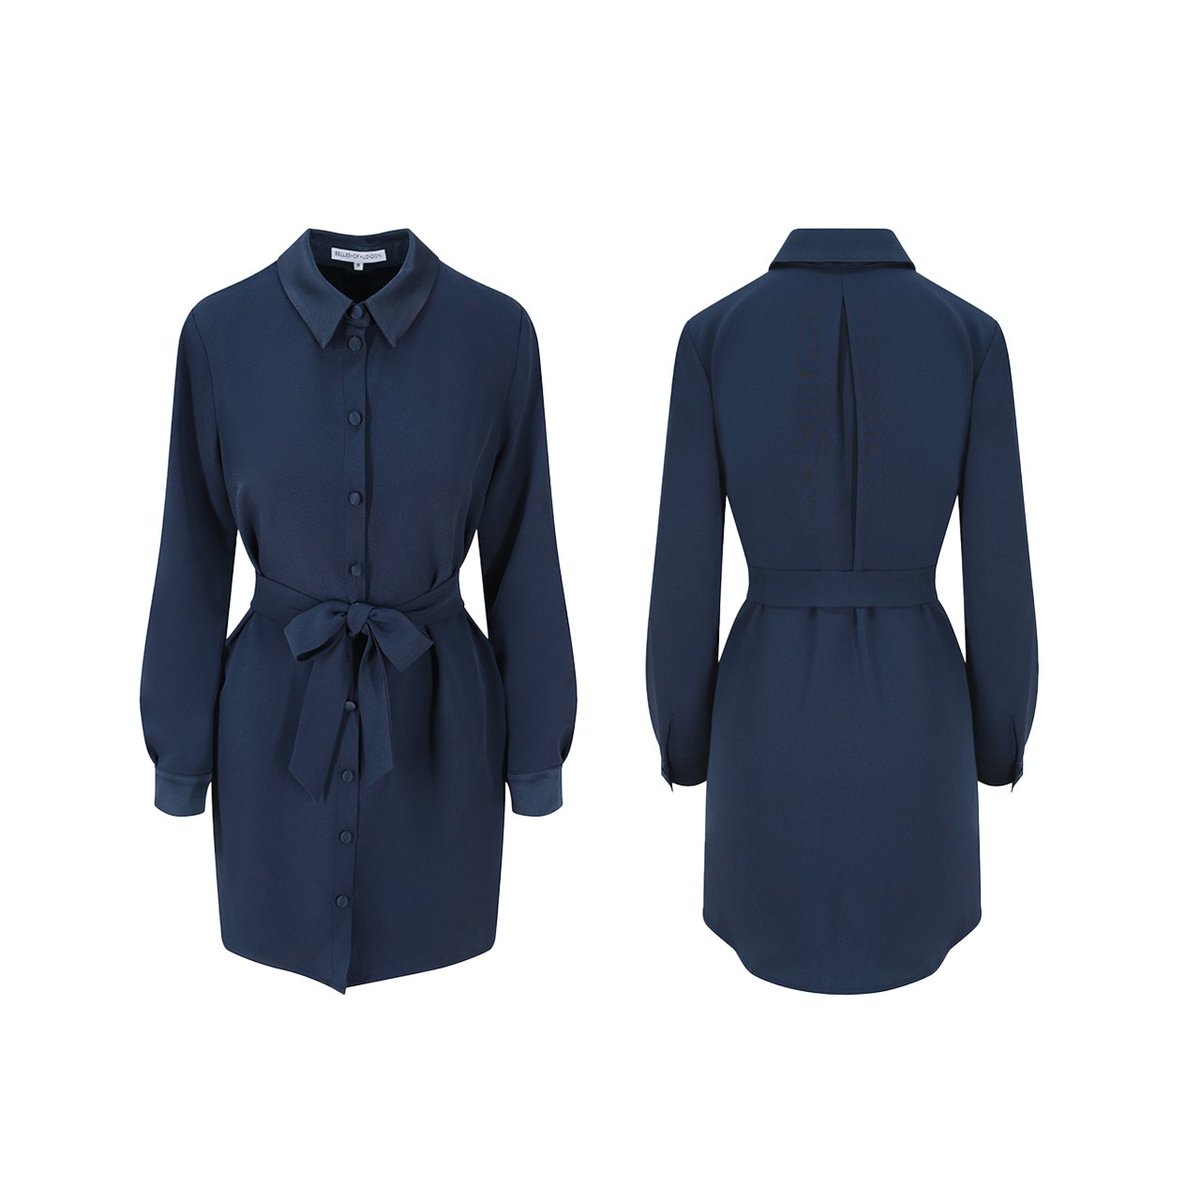 Stepping into the week with a touch of sophistication in this stylish navy shirt dress. From its effortless silhouette to its timeless hue, it's the epitome of understated elegance. 💙✨  #ChicStyle #NavyLove #FashionInspiration #ethicalfashion